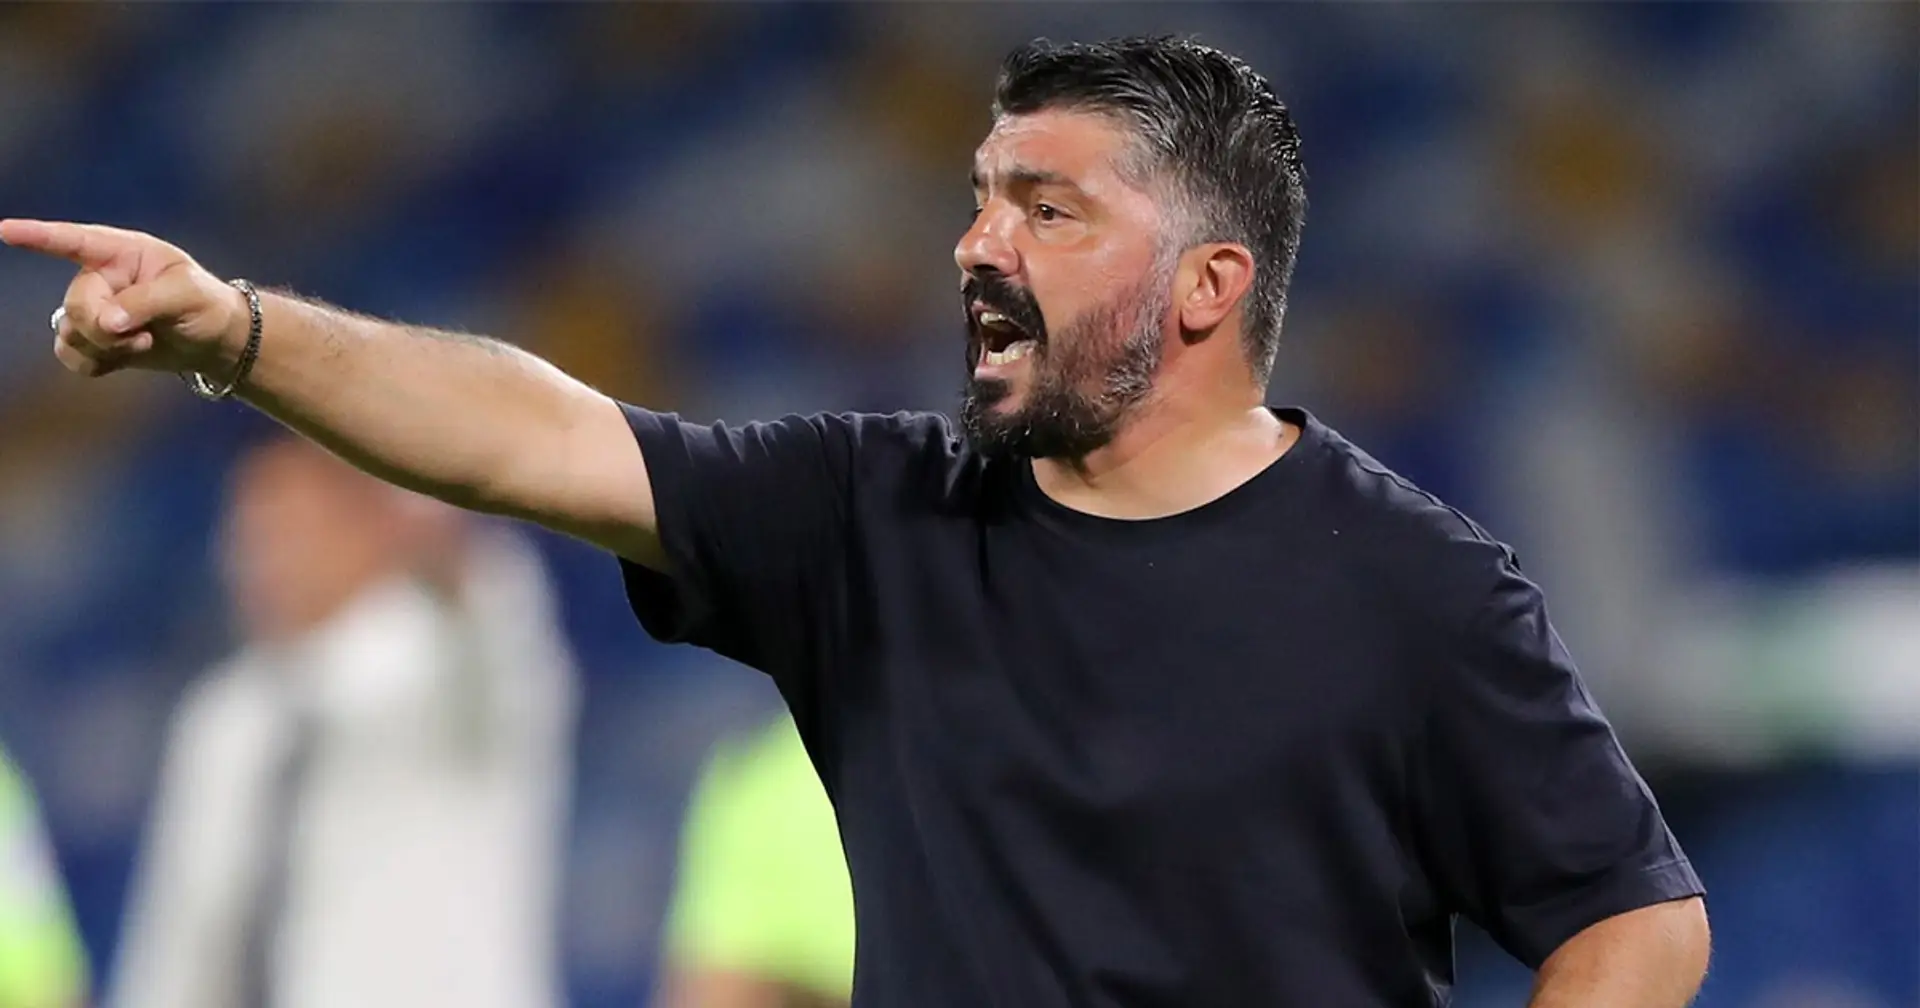 Gattuso tips Napoli to 'make history' by beating Barca and qualifying for quarter-finals